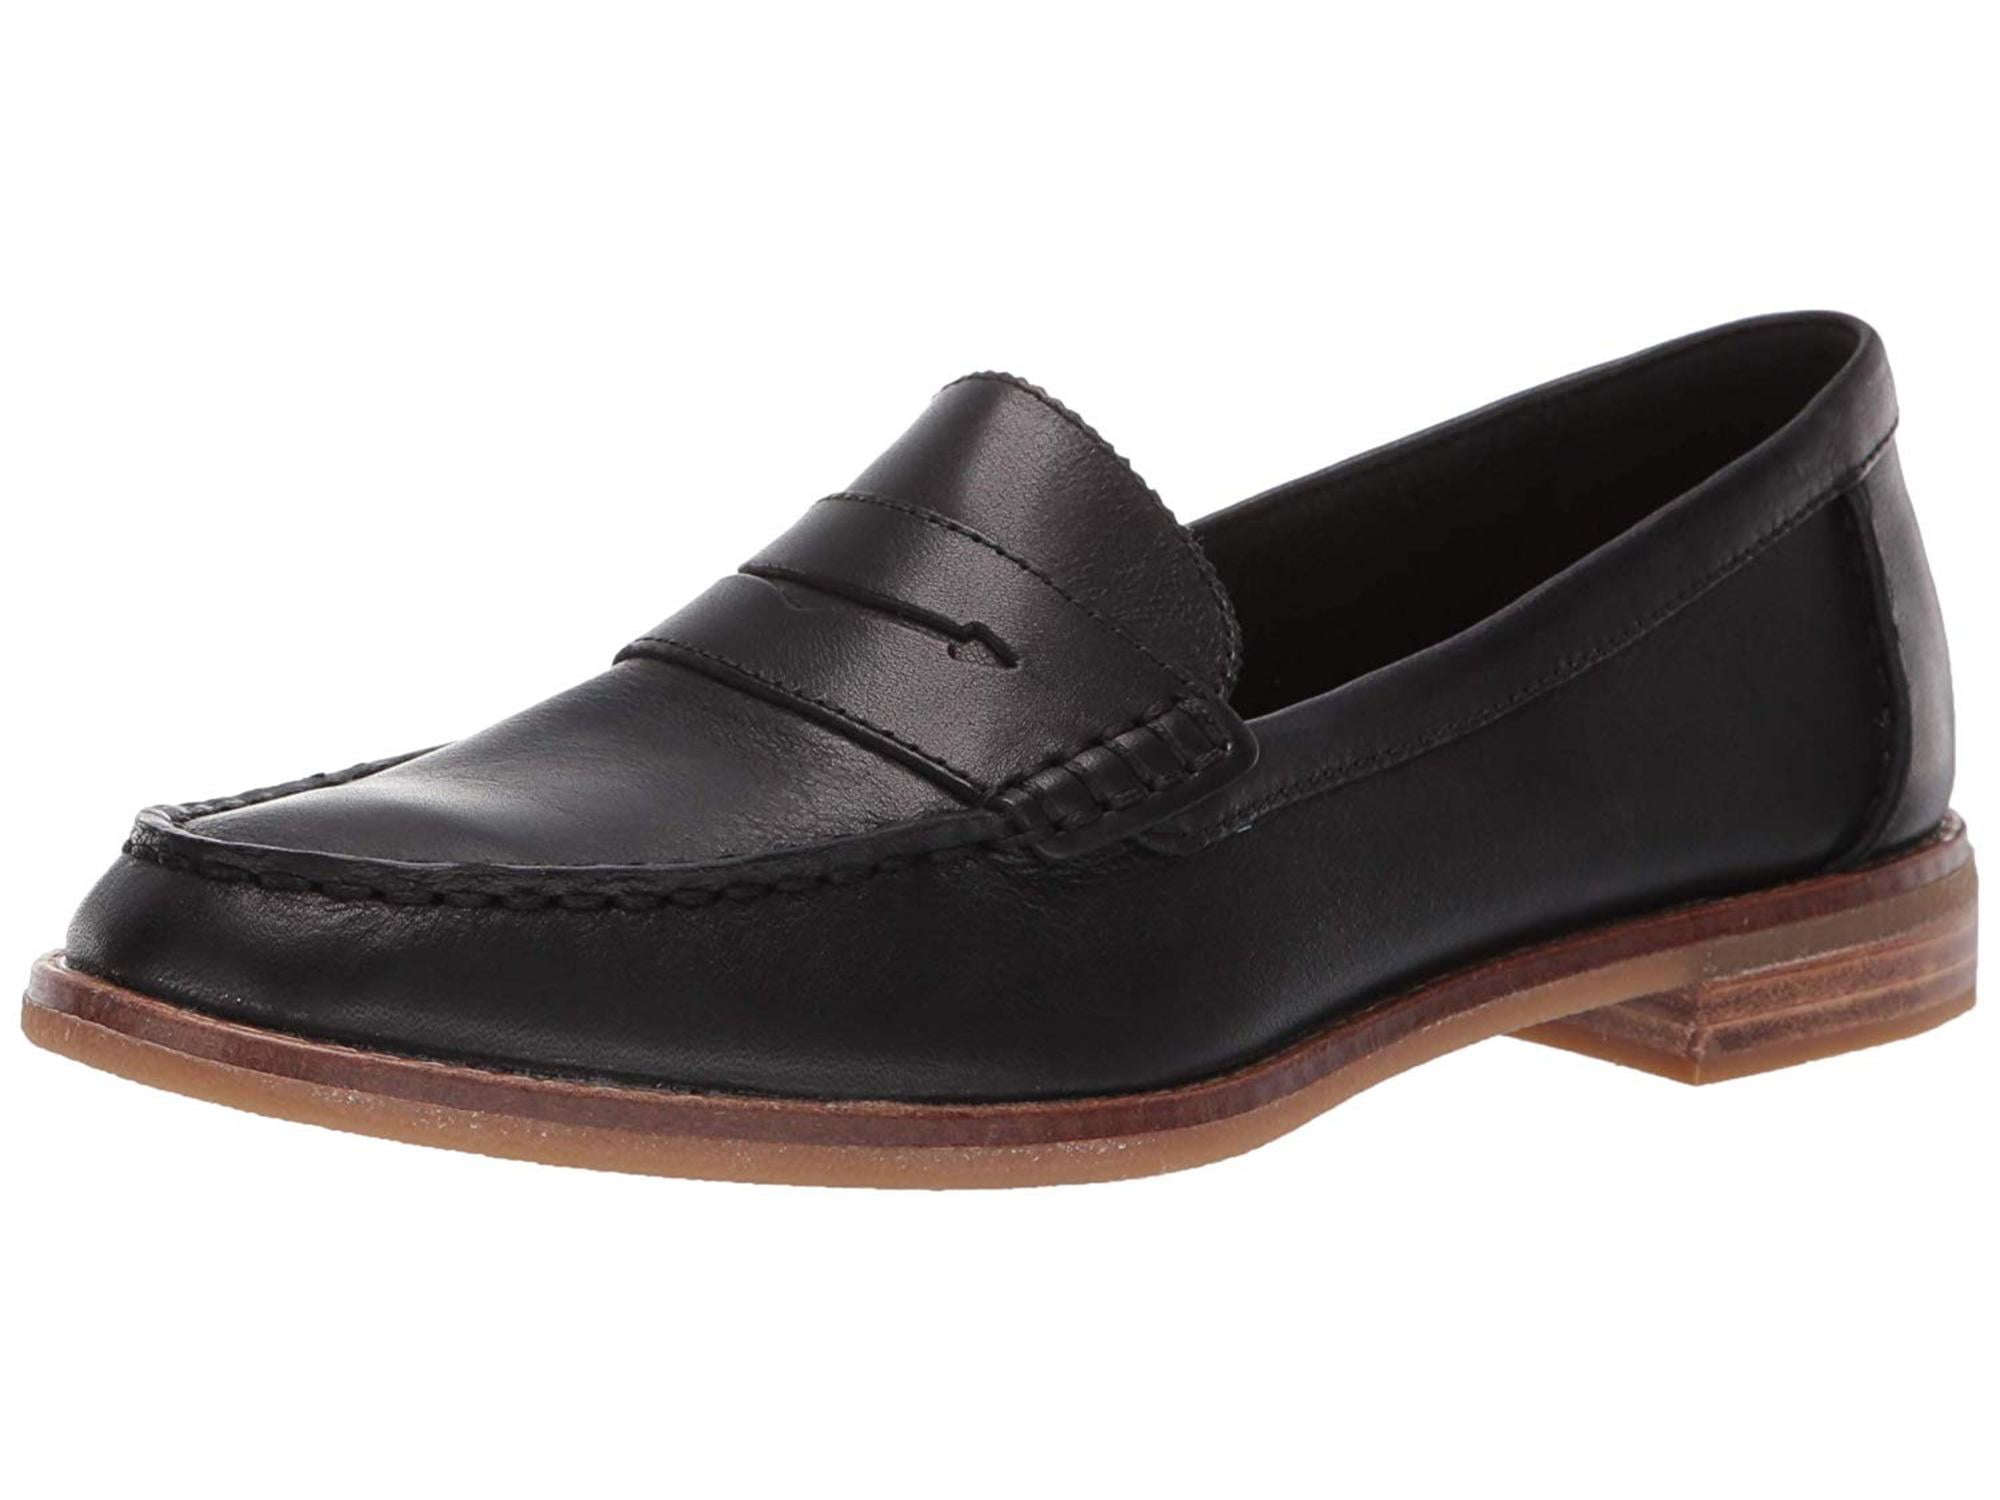 Sperry Womens seaport penny Fabric Closed Toe Loafers, Black, Size 8.0